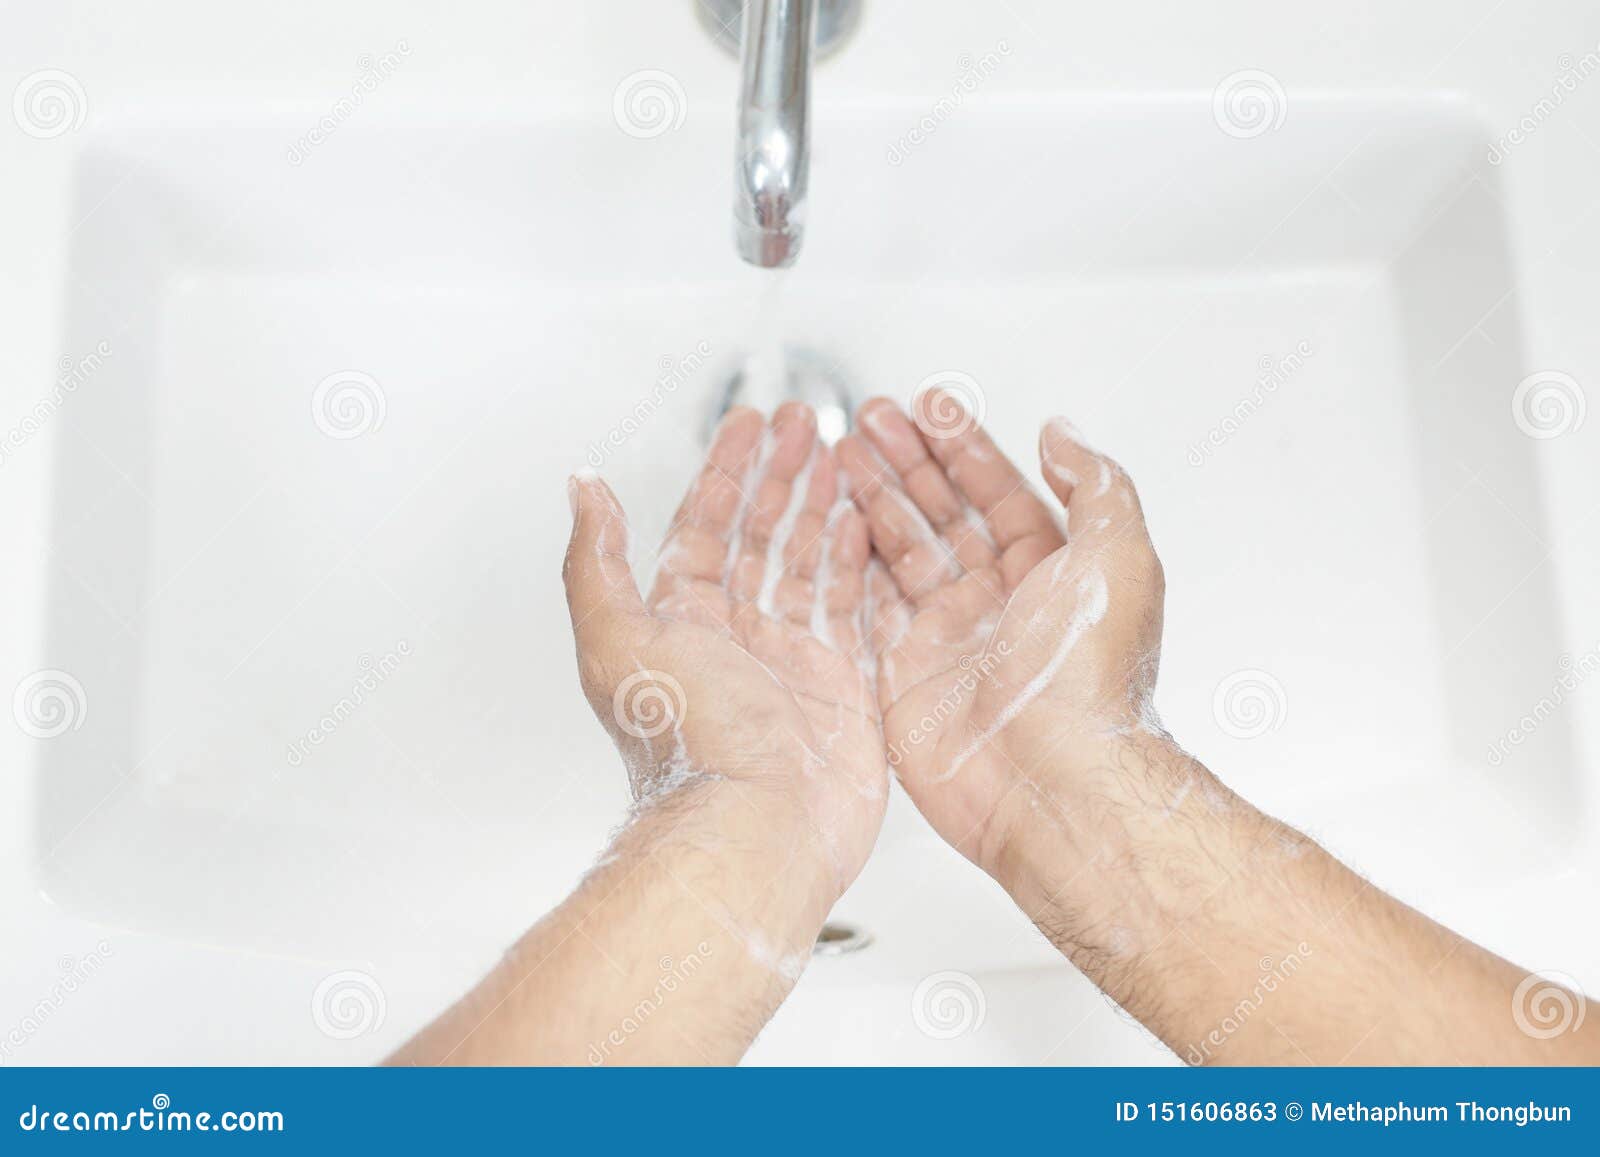 Hygiene Cleaning Hands Washing Hands With Soap Under The Faucet